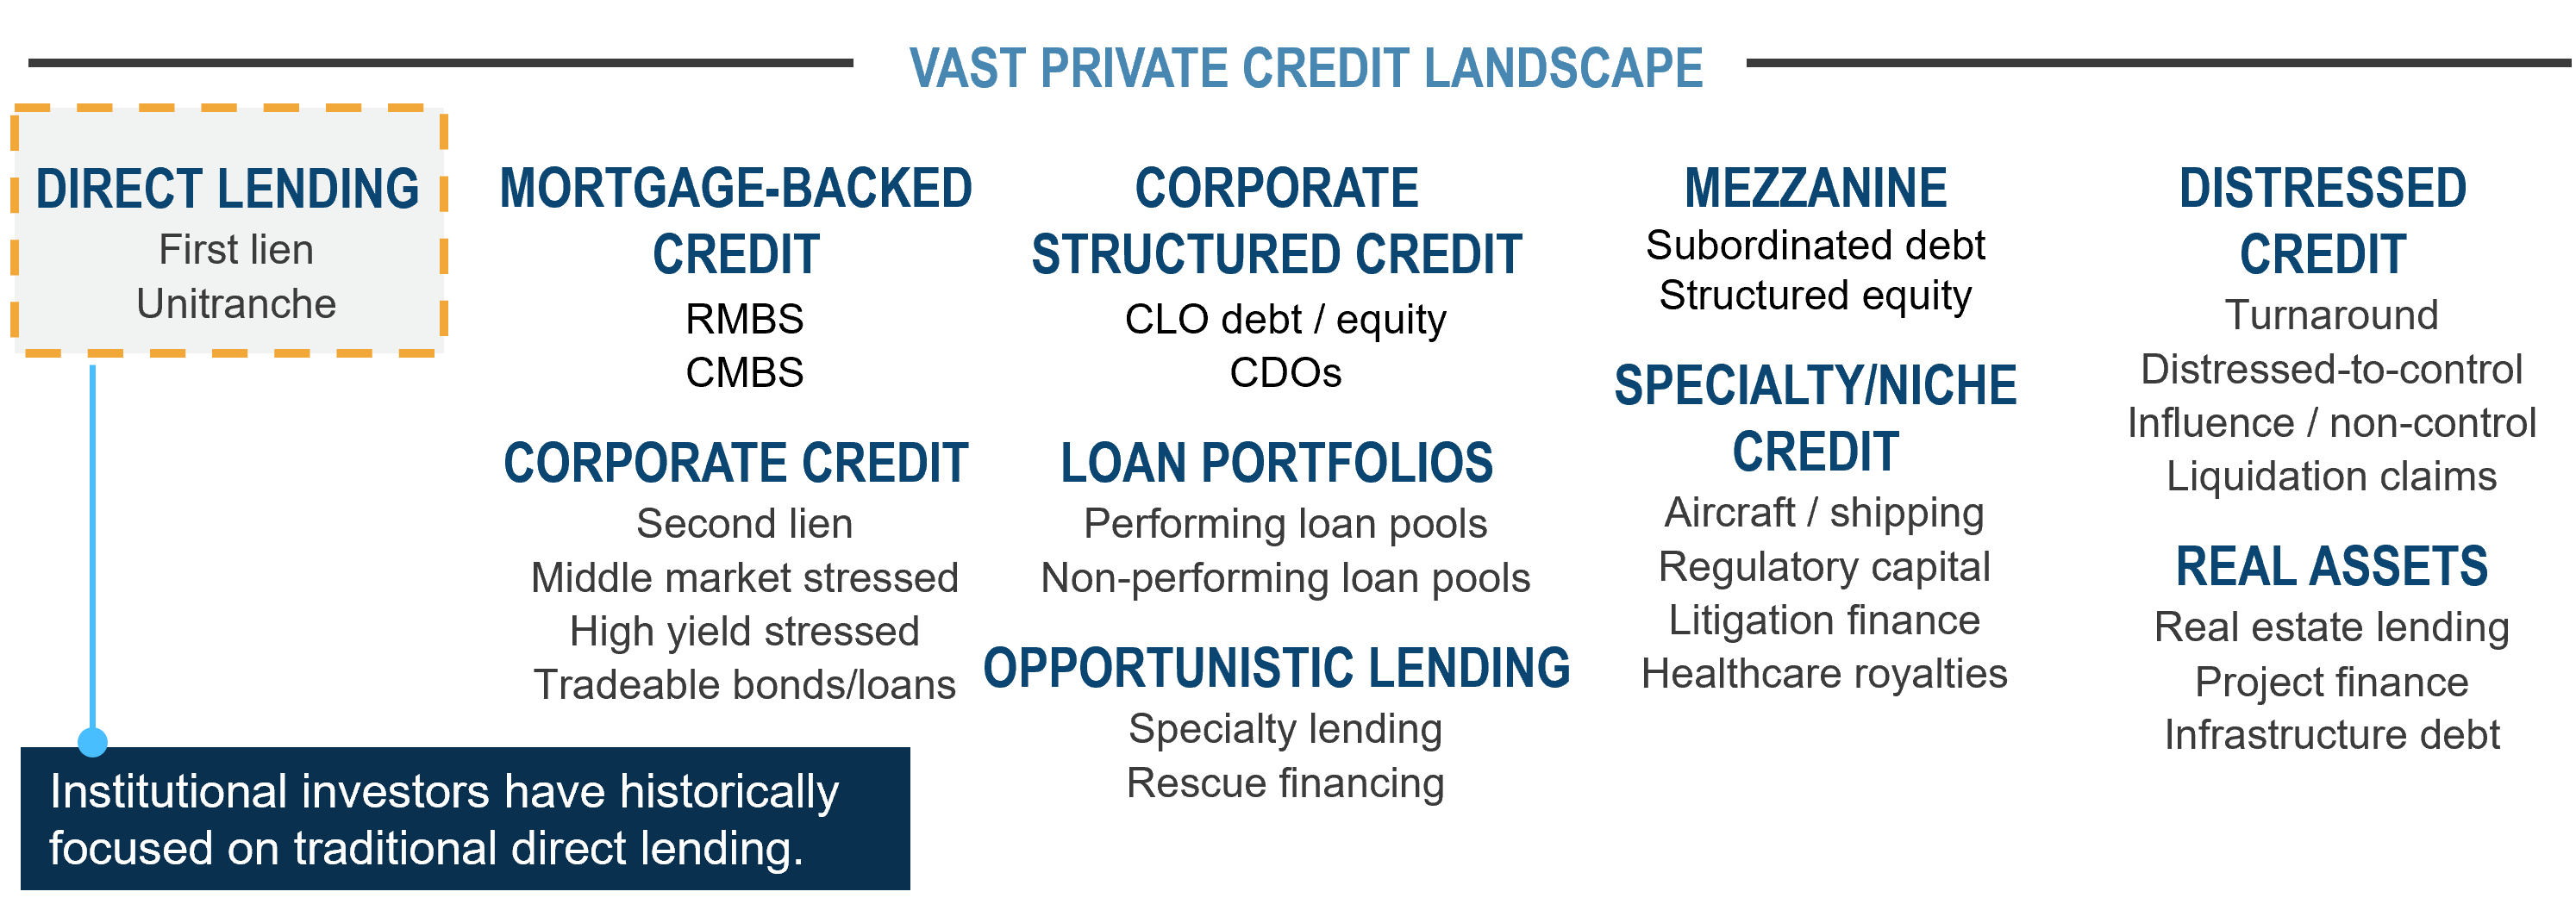 Explanation of private credit landscape: direct lending, mortgage backed credit, corporate credit, corporate structured credit, loan portfolios, opportunistic lending, mezzanine, niche, distressed credit, and real assets.